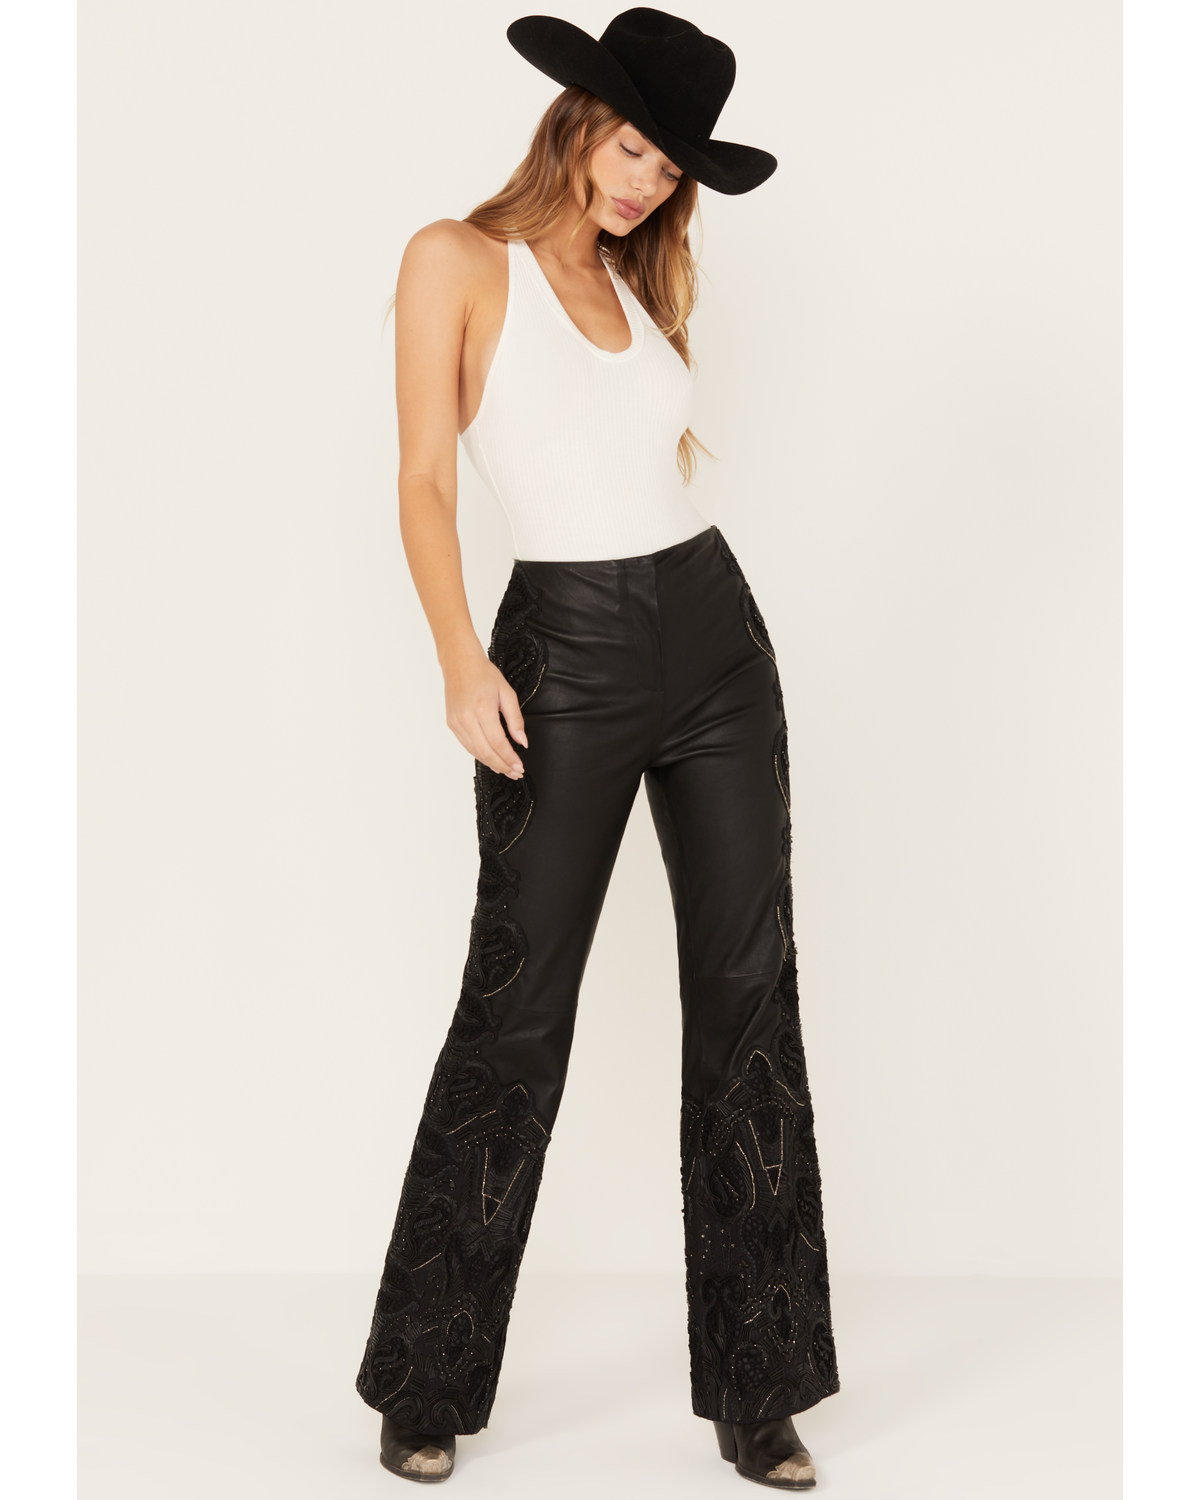 Wonderwest Women's Studded Leather Pant